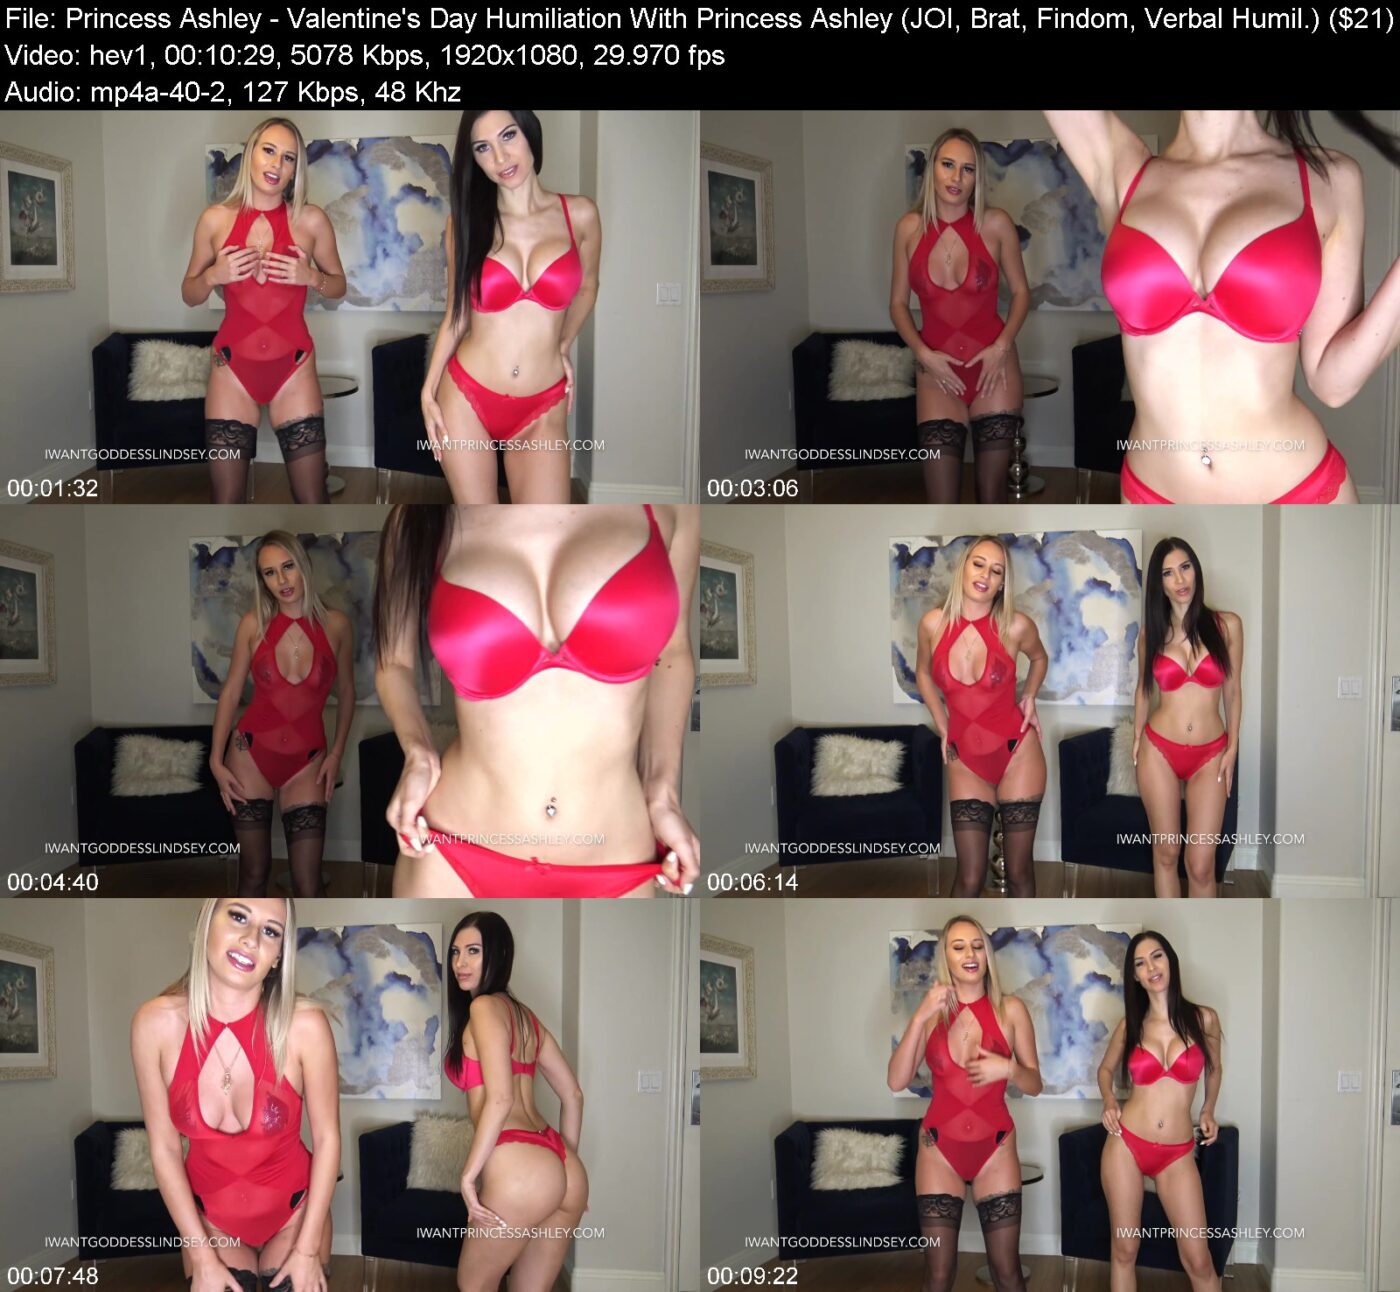 Princess Ashley in Valentine's Day Humiliation With Princess Ashley (JOI, Brat, Findom, Verbal Humil.) ($21) (1733329)